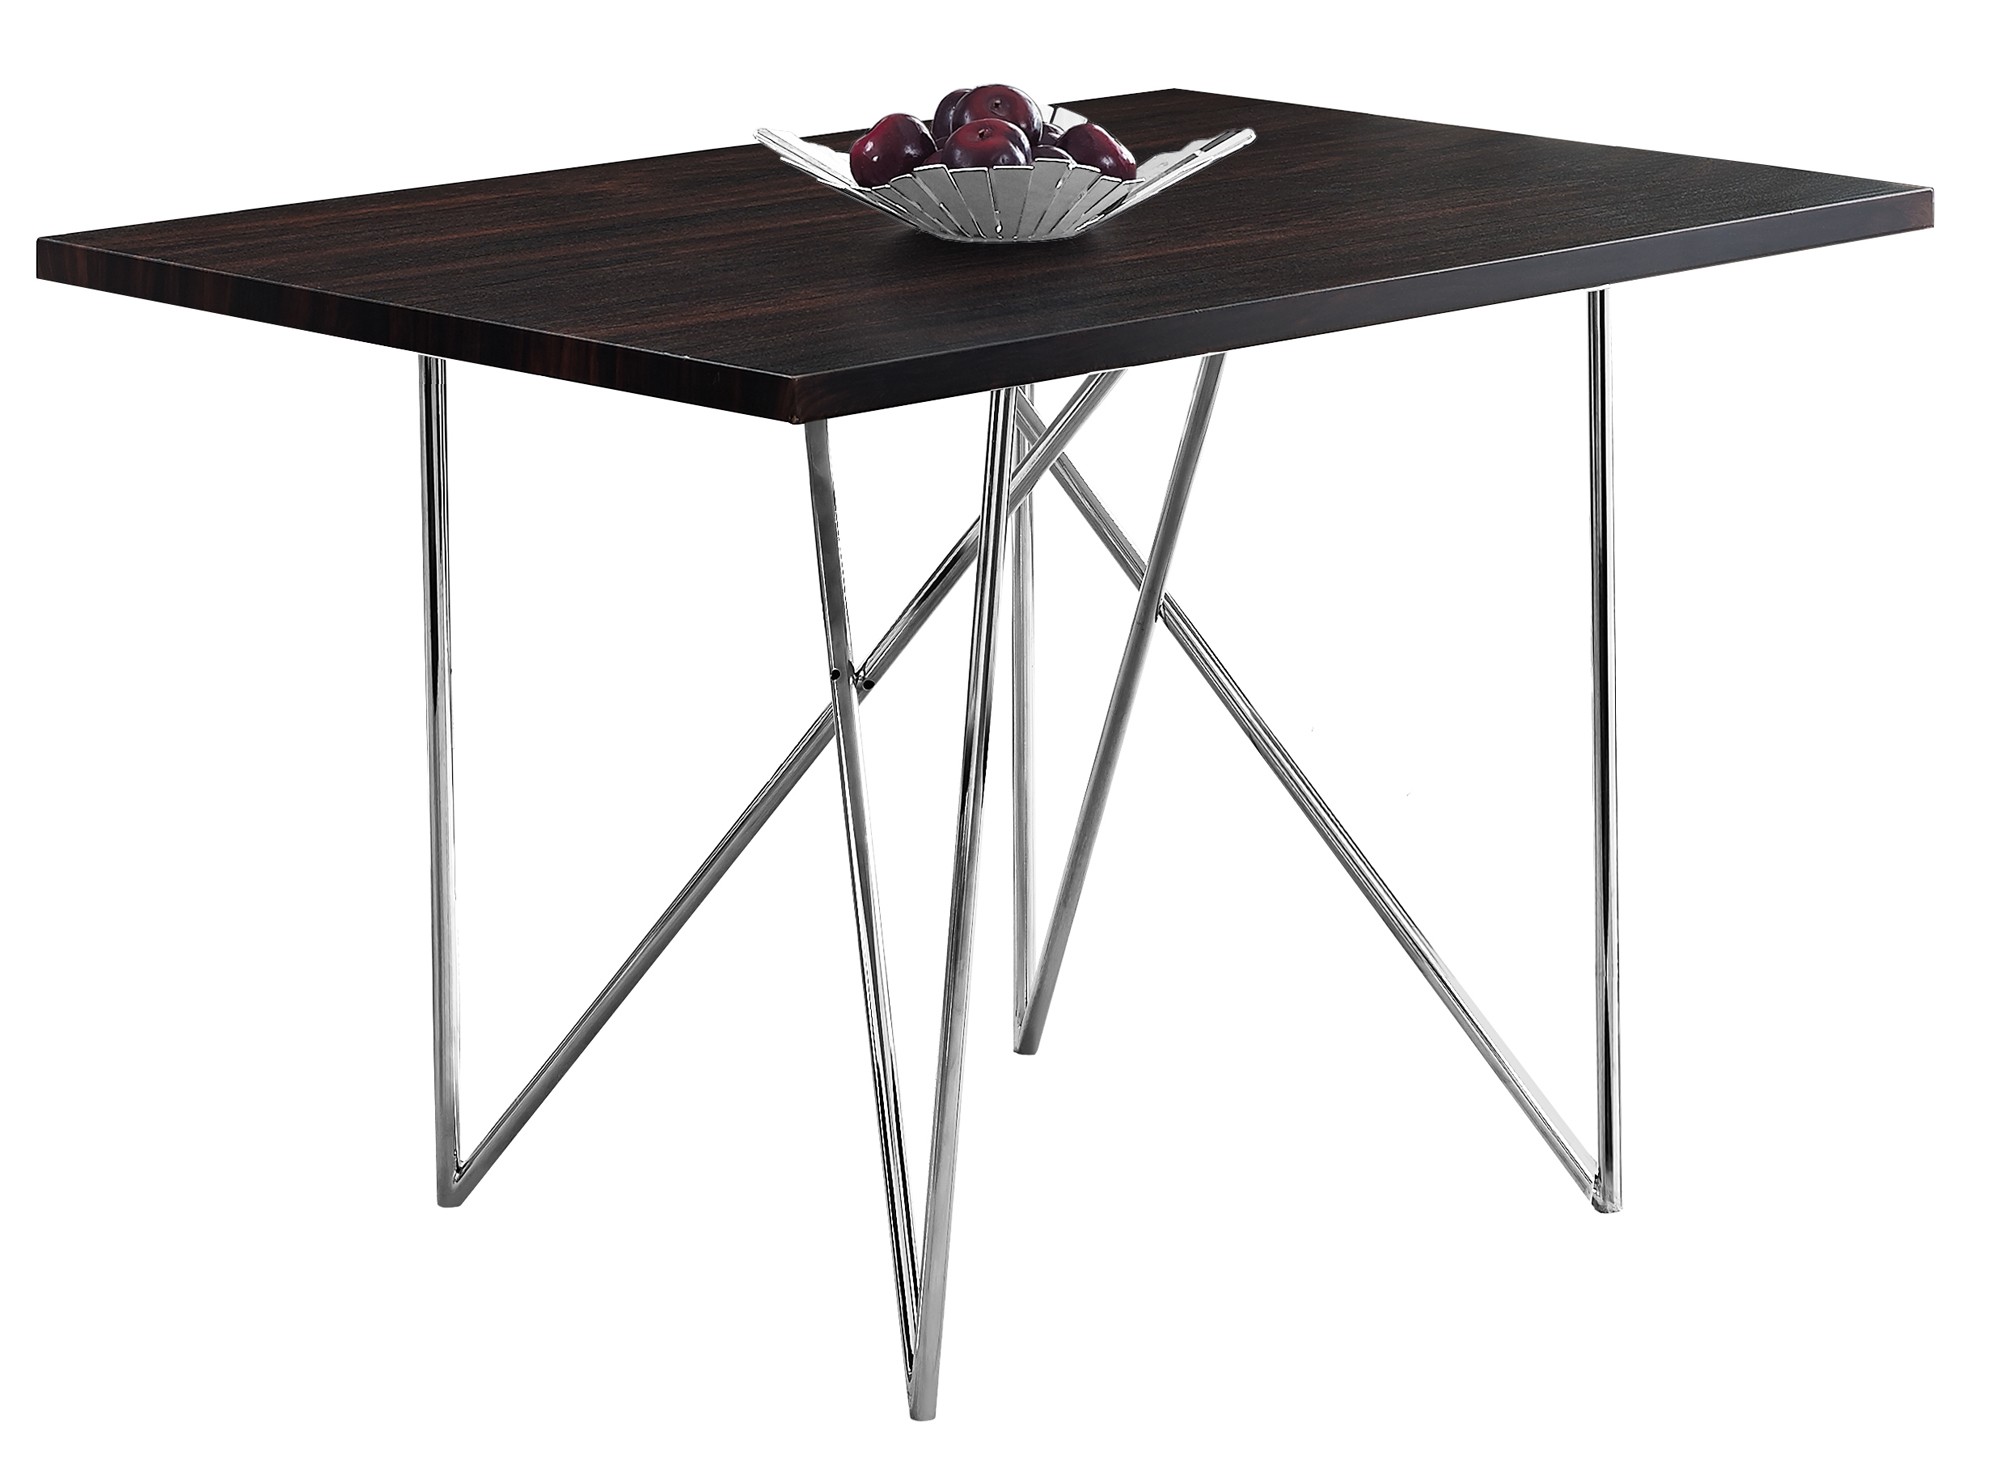 DINING TABLE - 32"X 48" / CAPPUCCINO / CHROME METAL